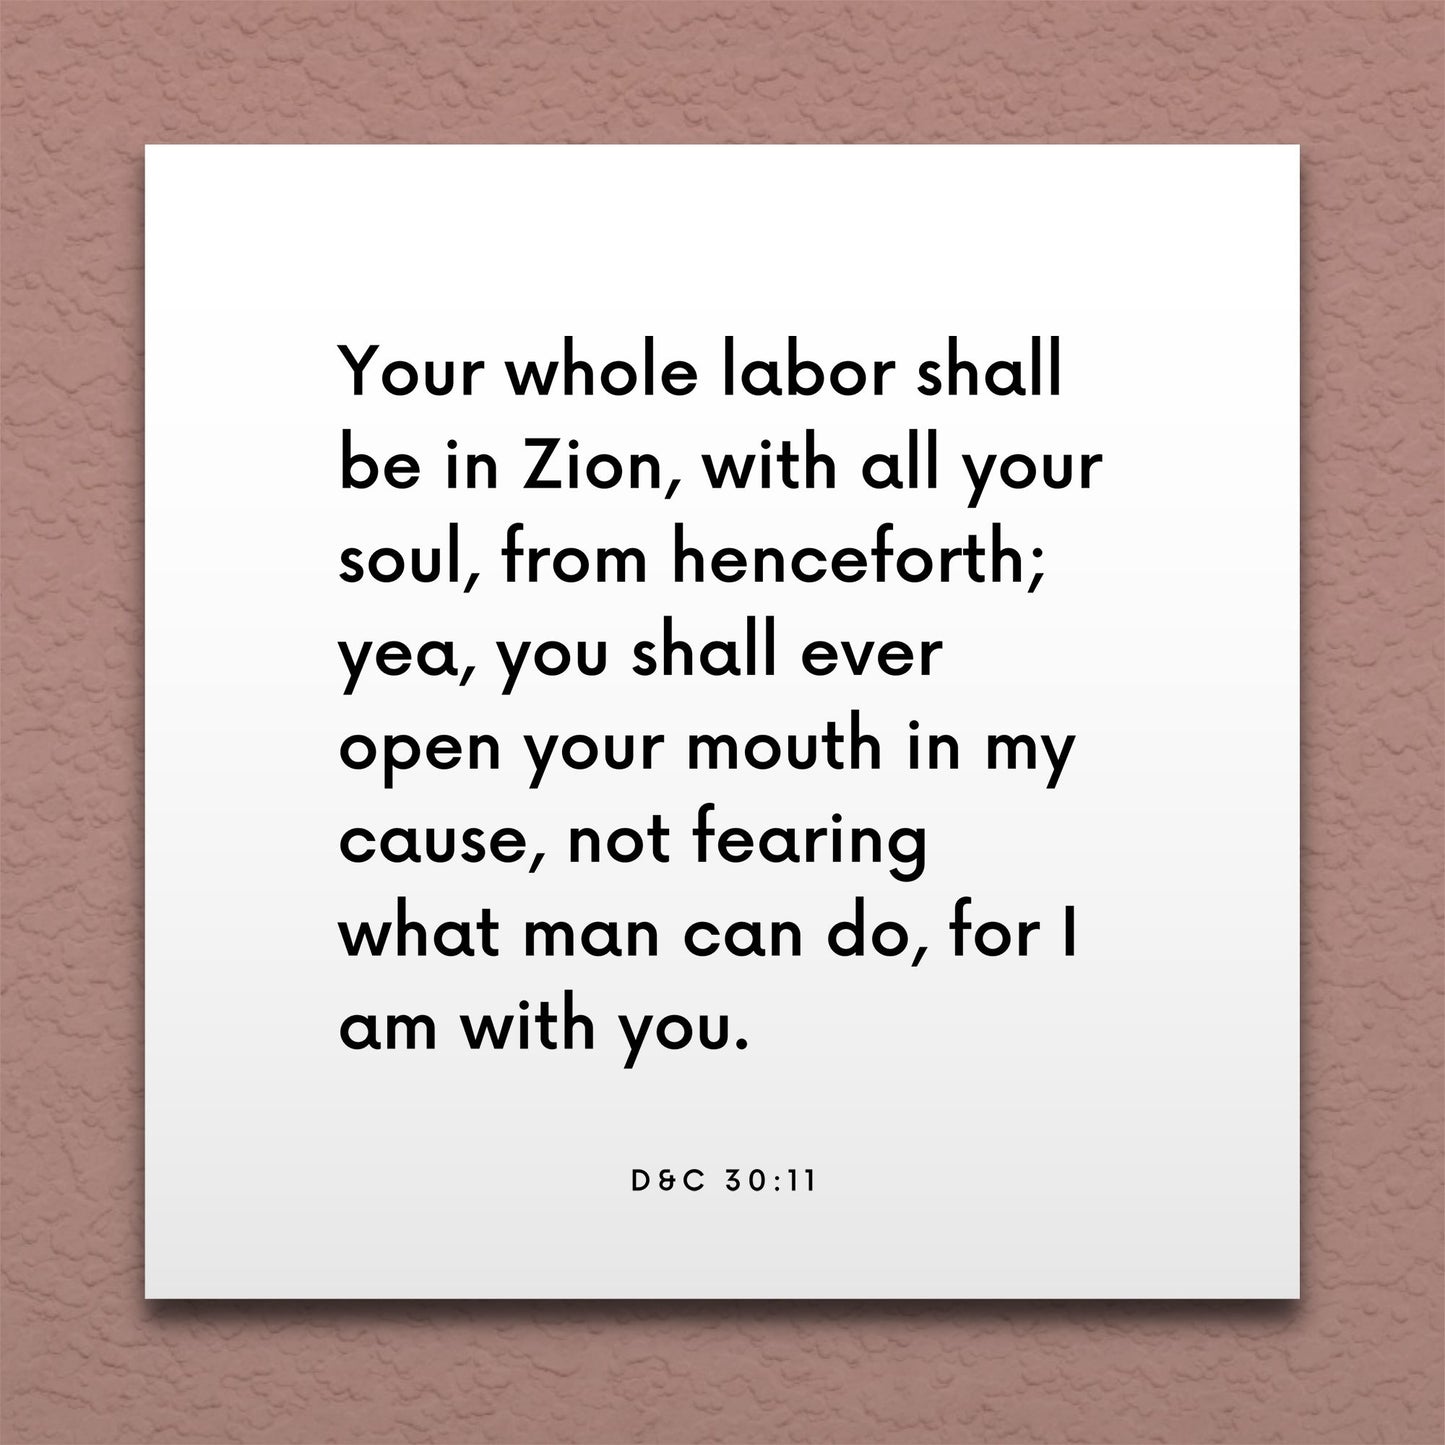 Wall-mounted scripture tile for D&C 30:11 - "Your whole labor shall be in Zion, with all your soul"